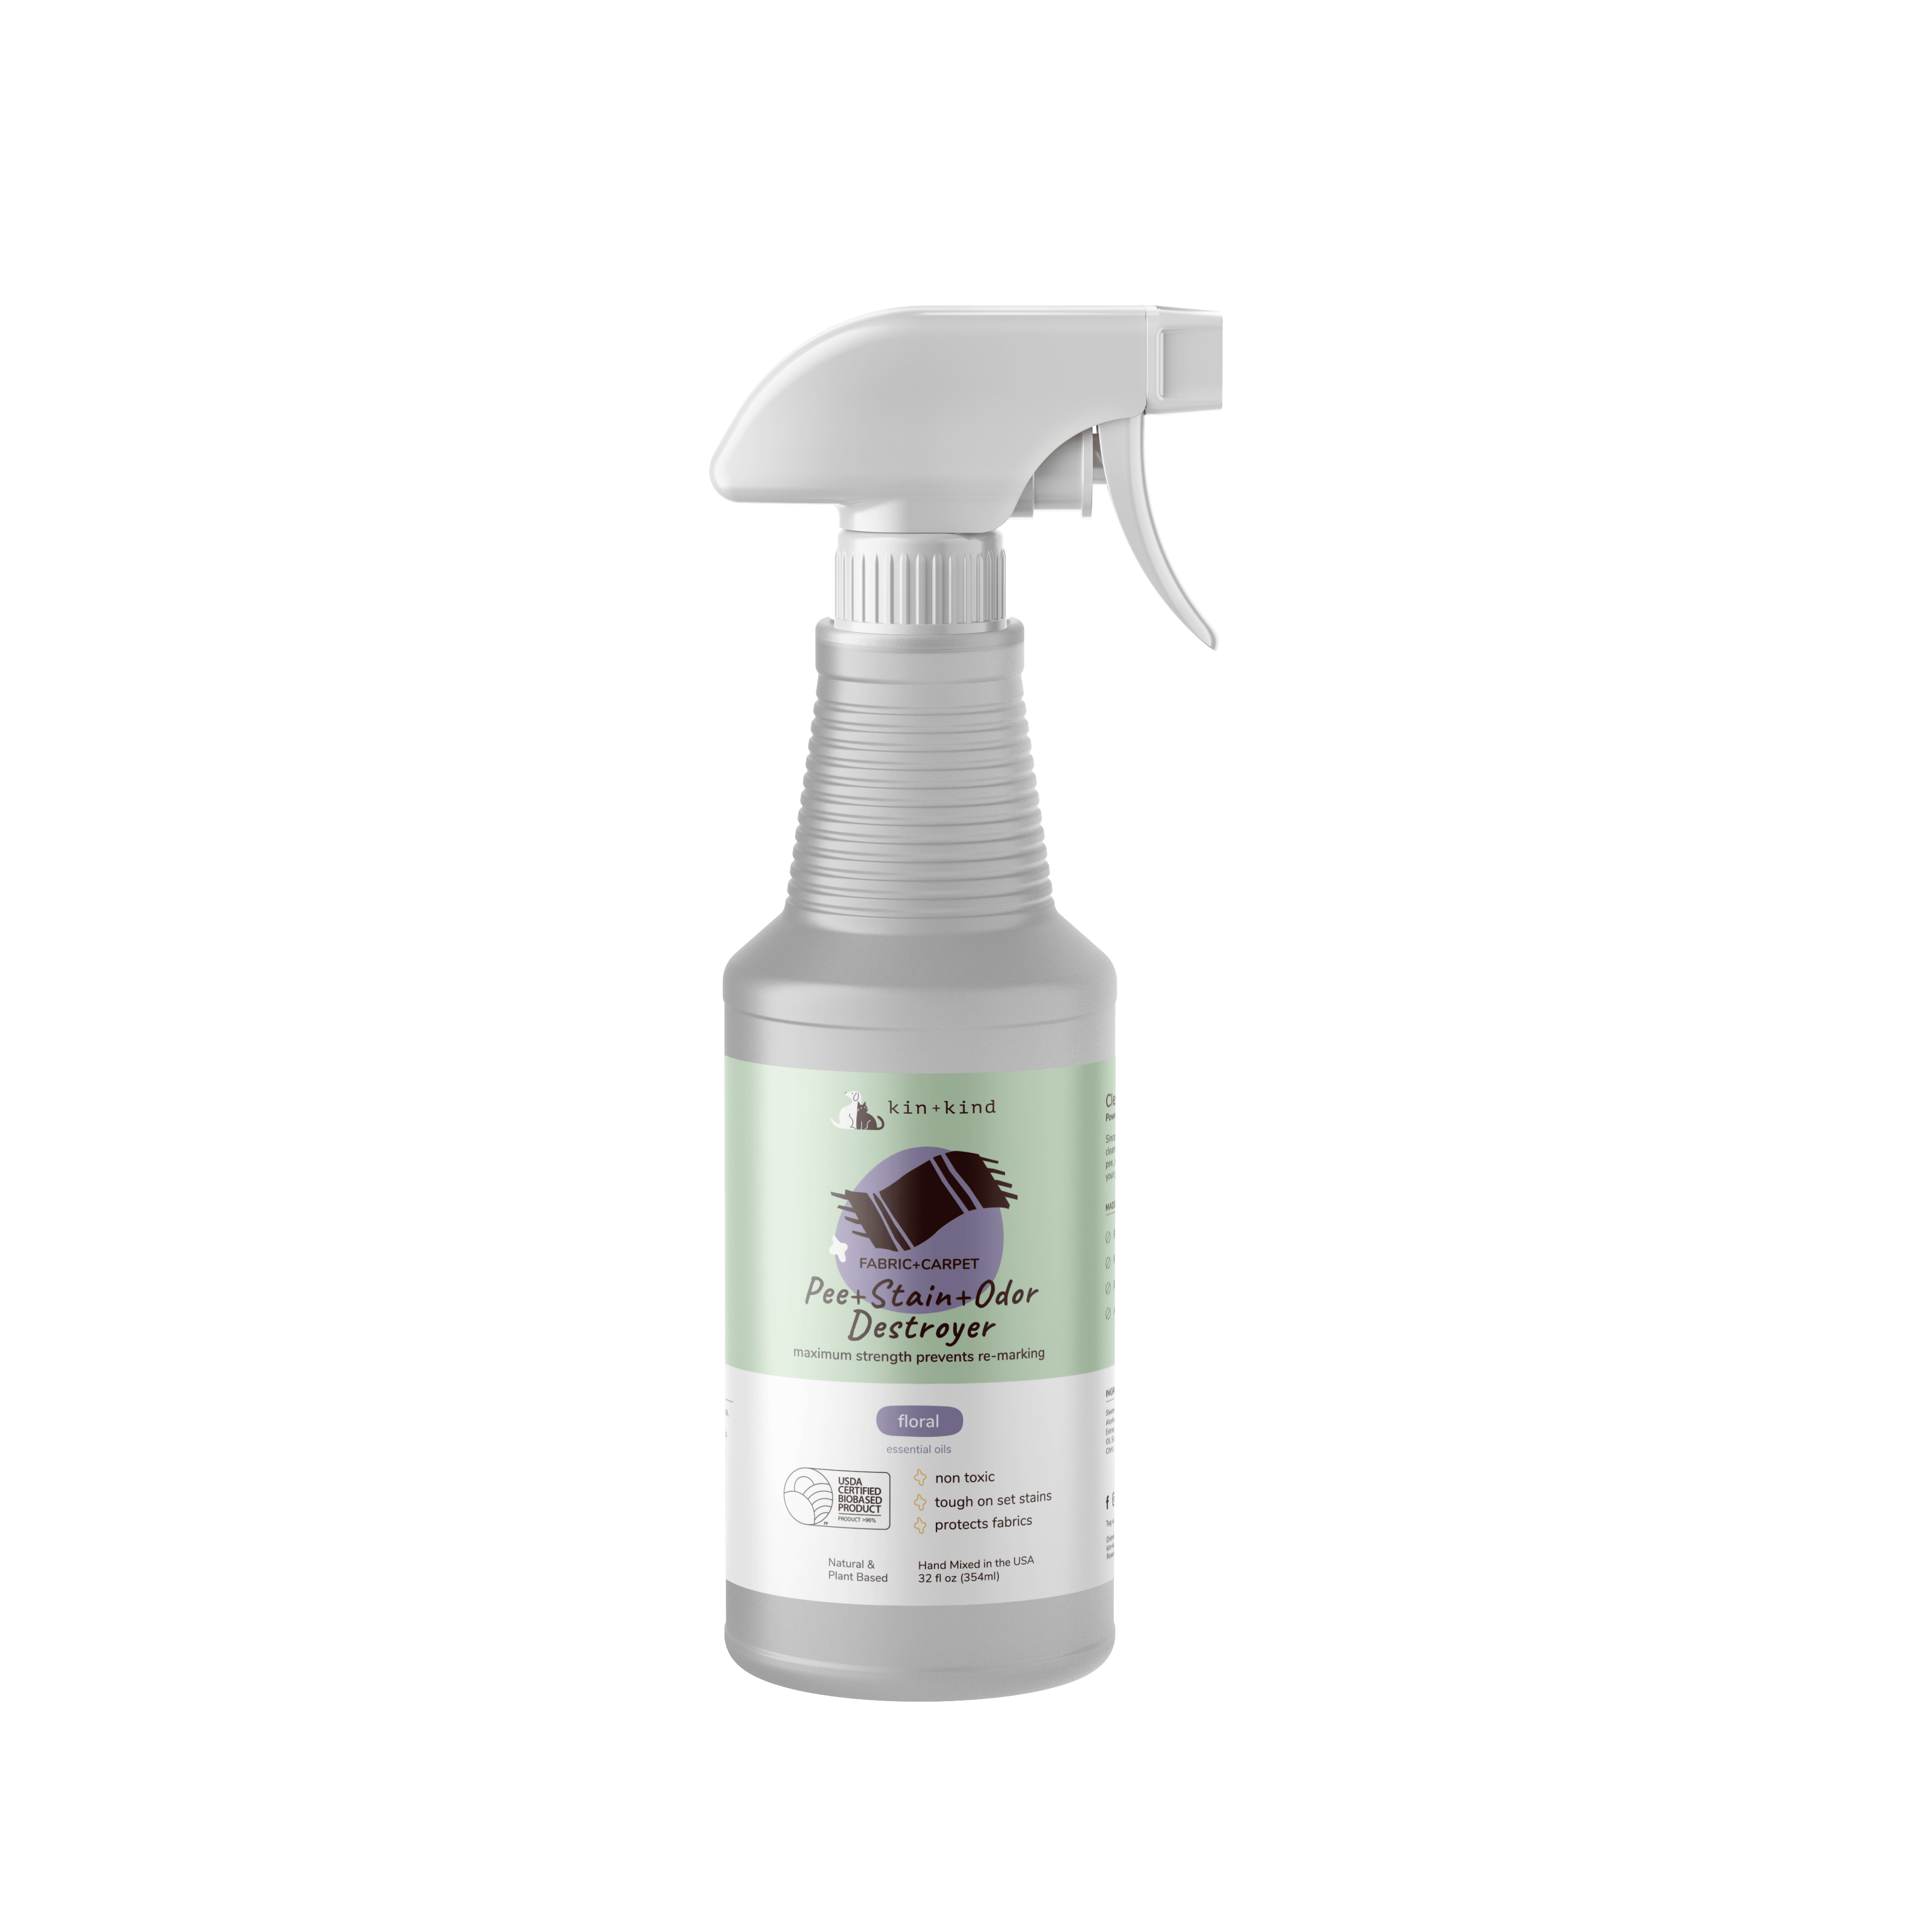 Pee+Stain+Odor Destroyer (Fabric+Carpet) - Rocky & Maggie's Pet Boutique and Salon